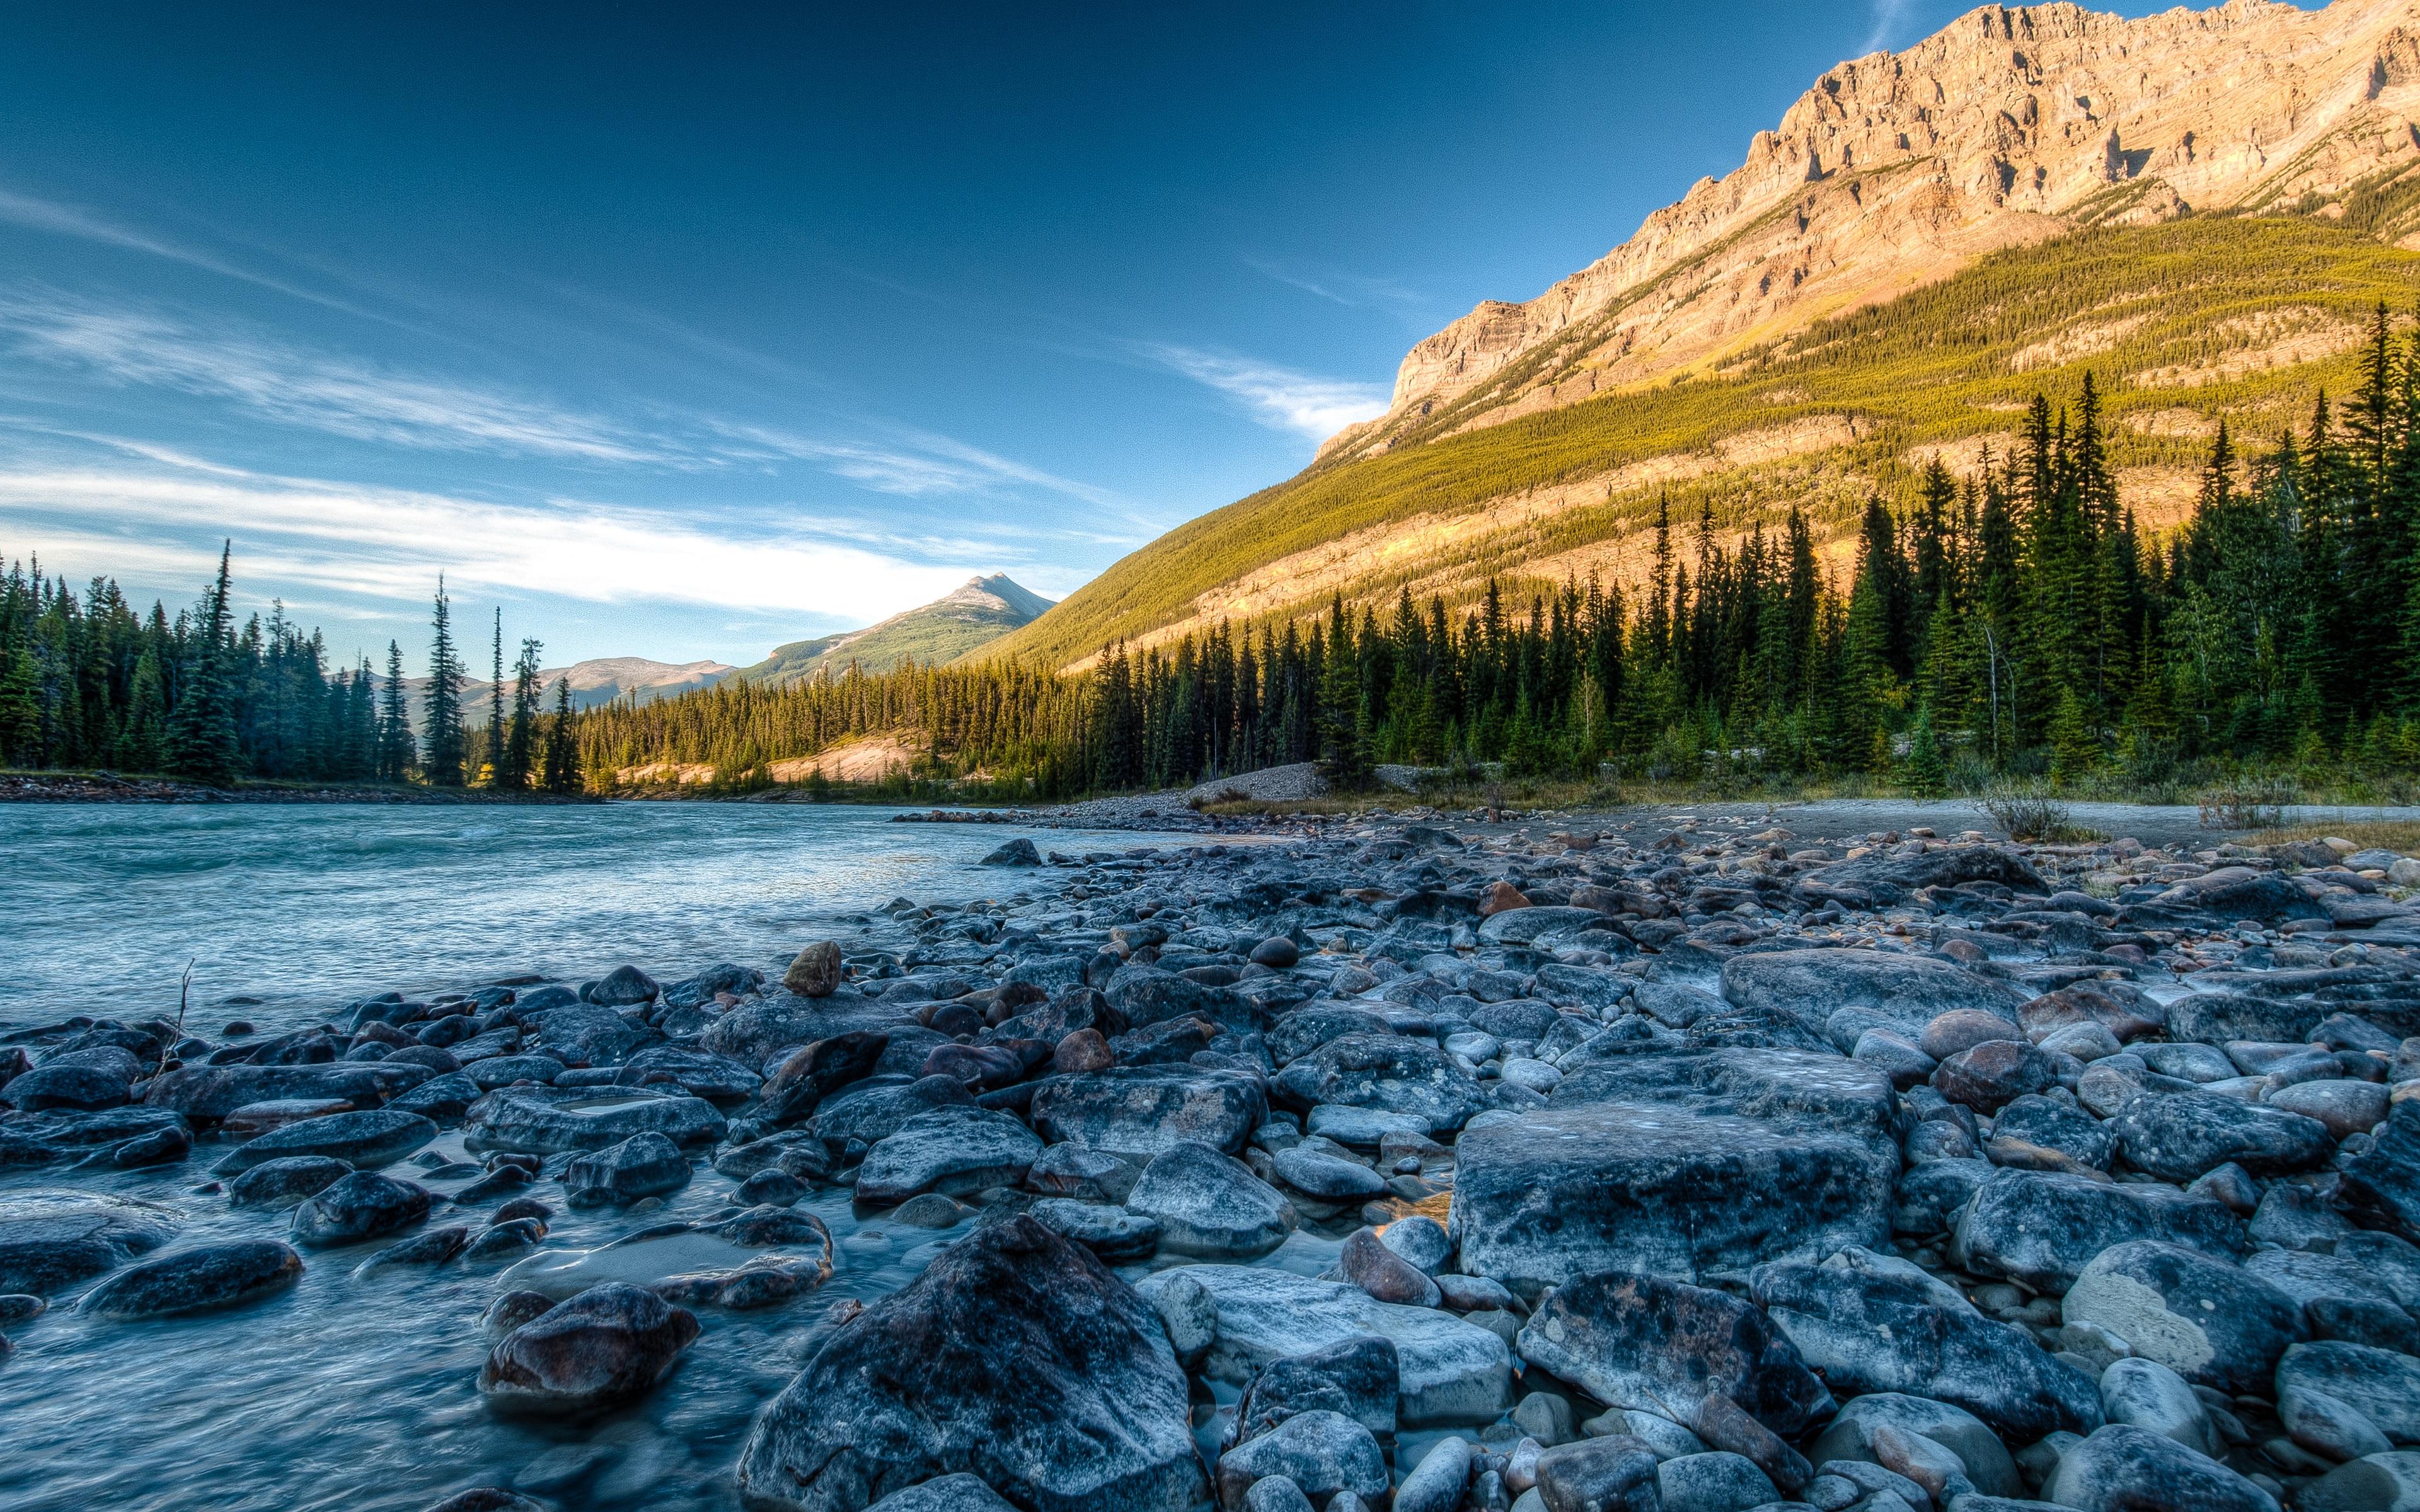 Download wallpaper 3840x2400 rocky mountains, river, stones